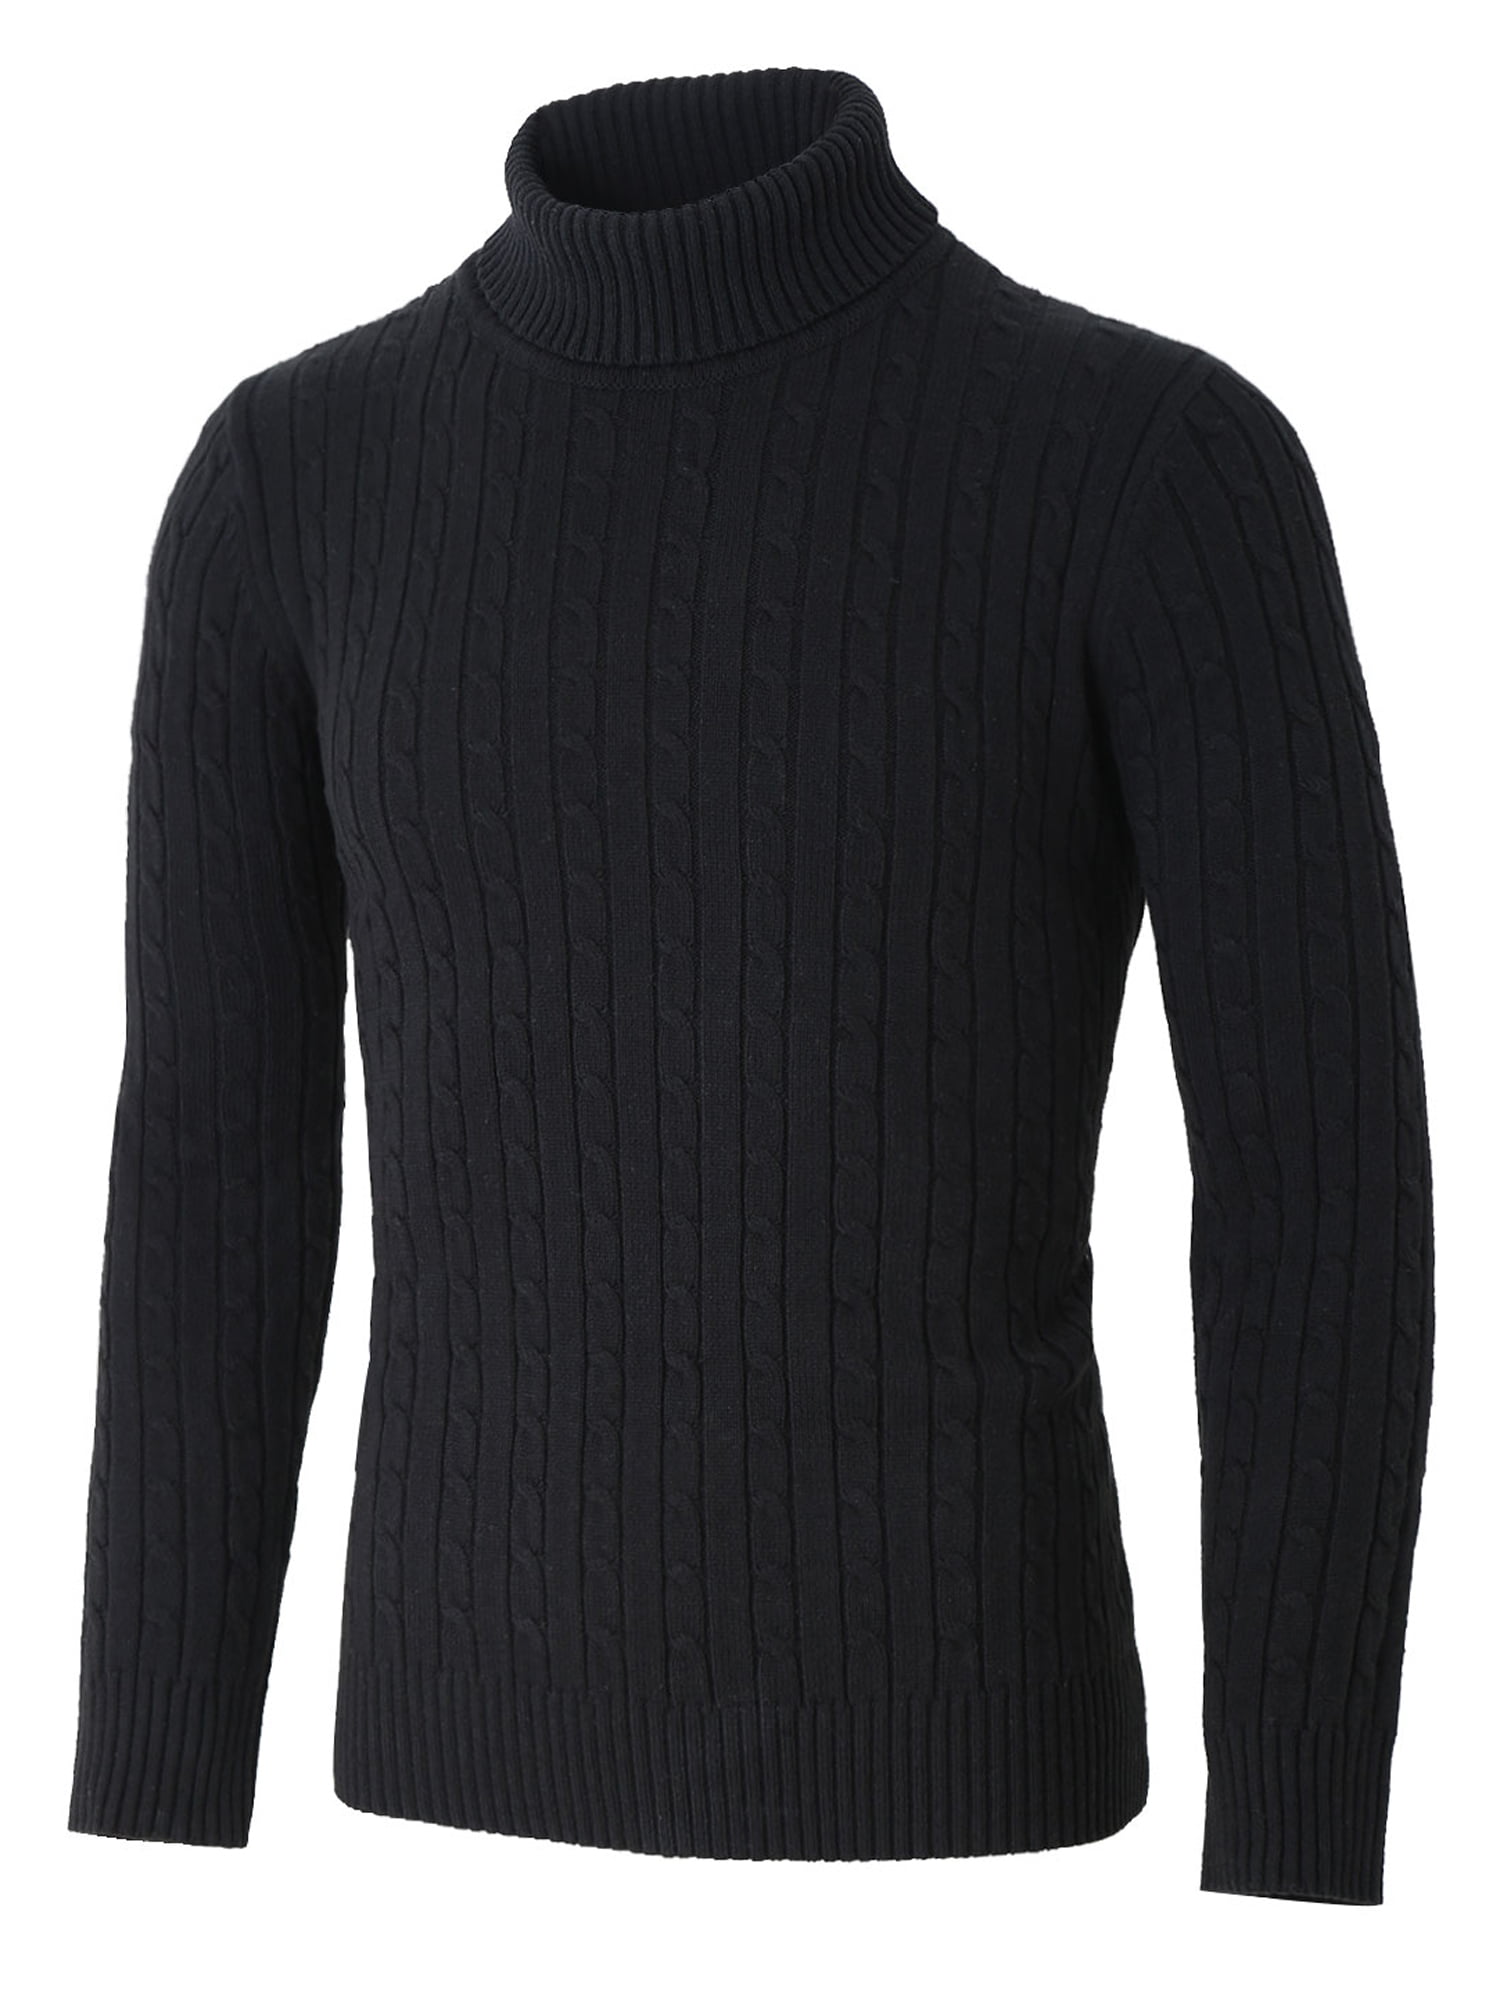 pujingge Mens Pullover Sweaters Crew Neck Long Sleeve Cable Knit Sweater Tops 